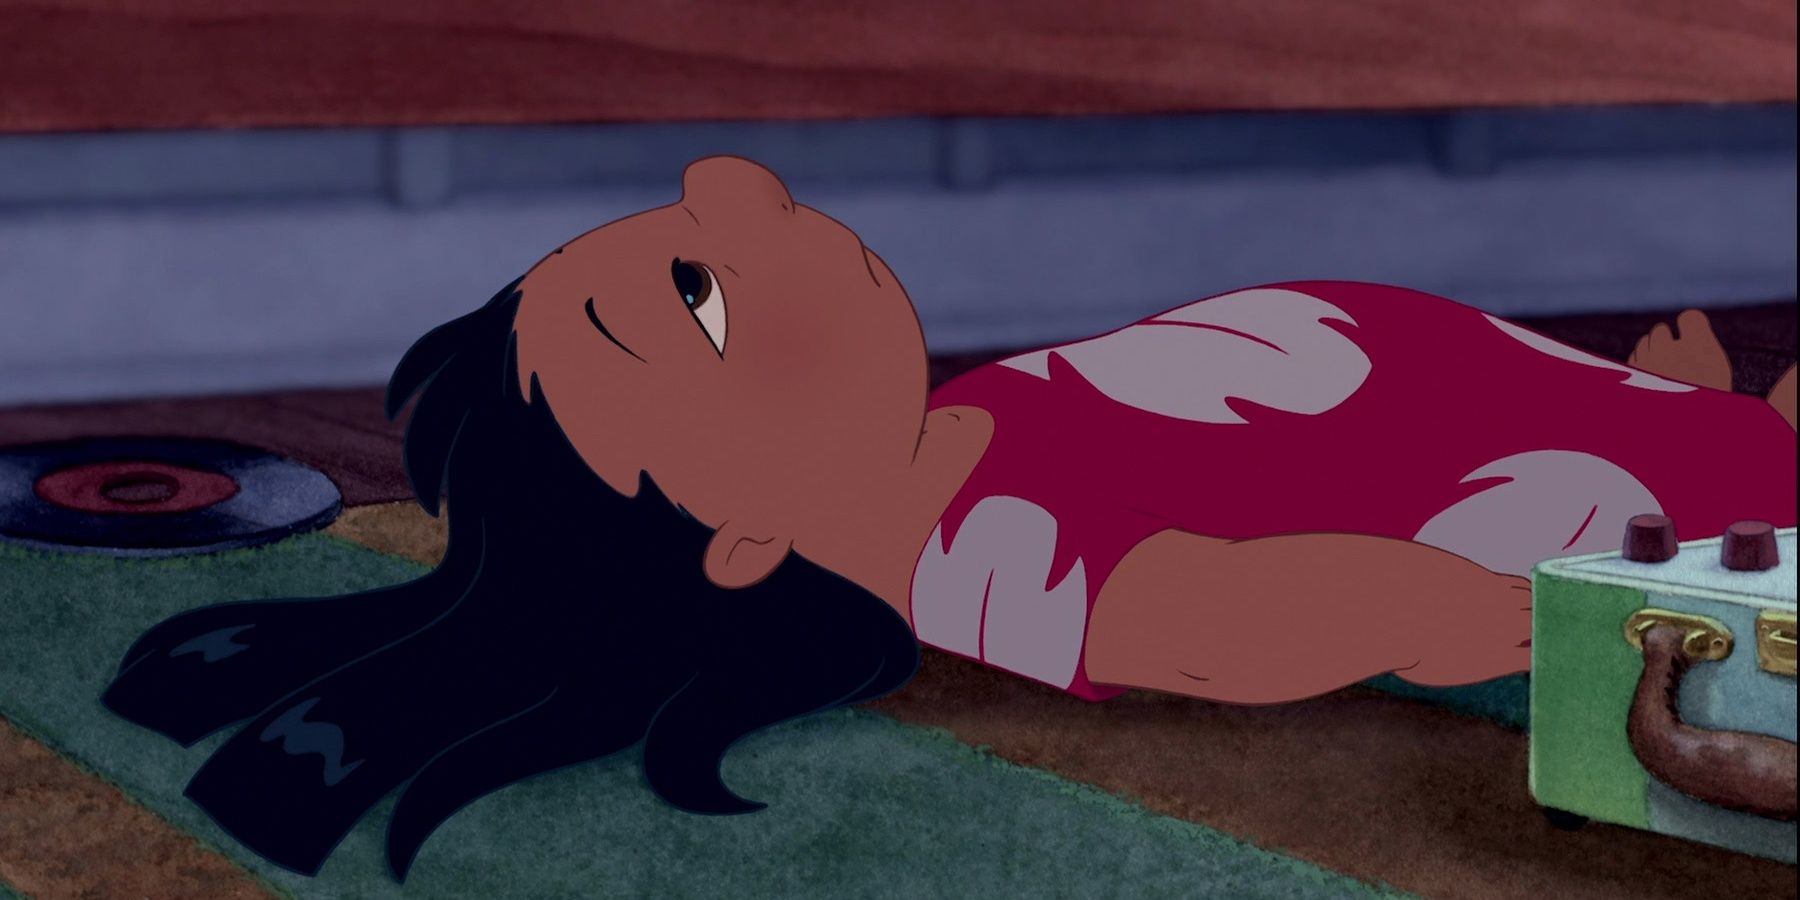 Lilo laying down listening to a record in Lilo &amp; Stitch 